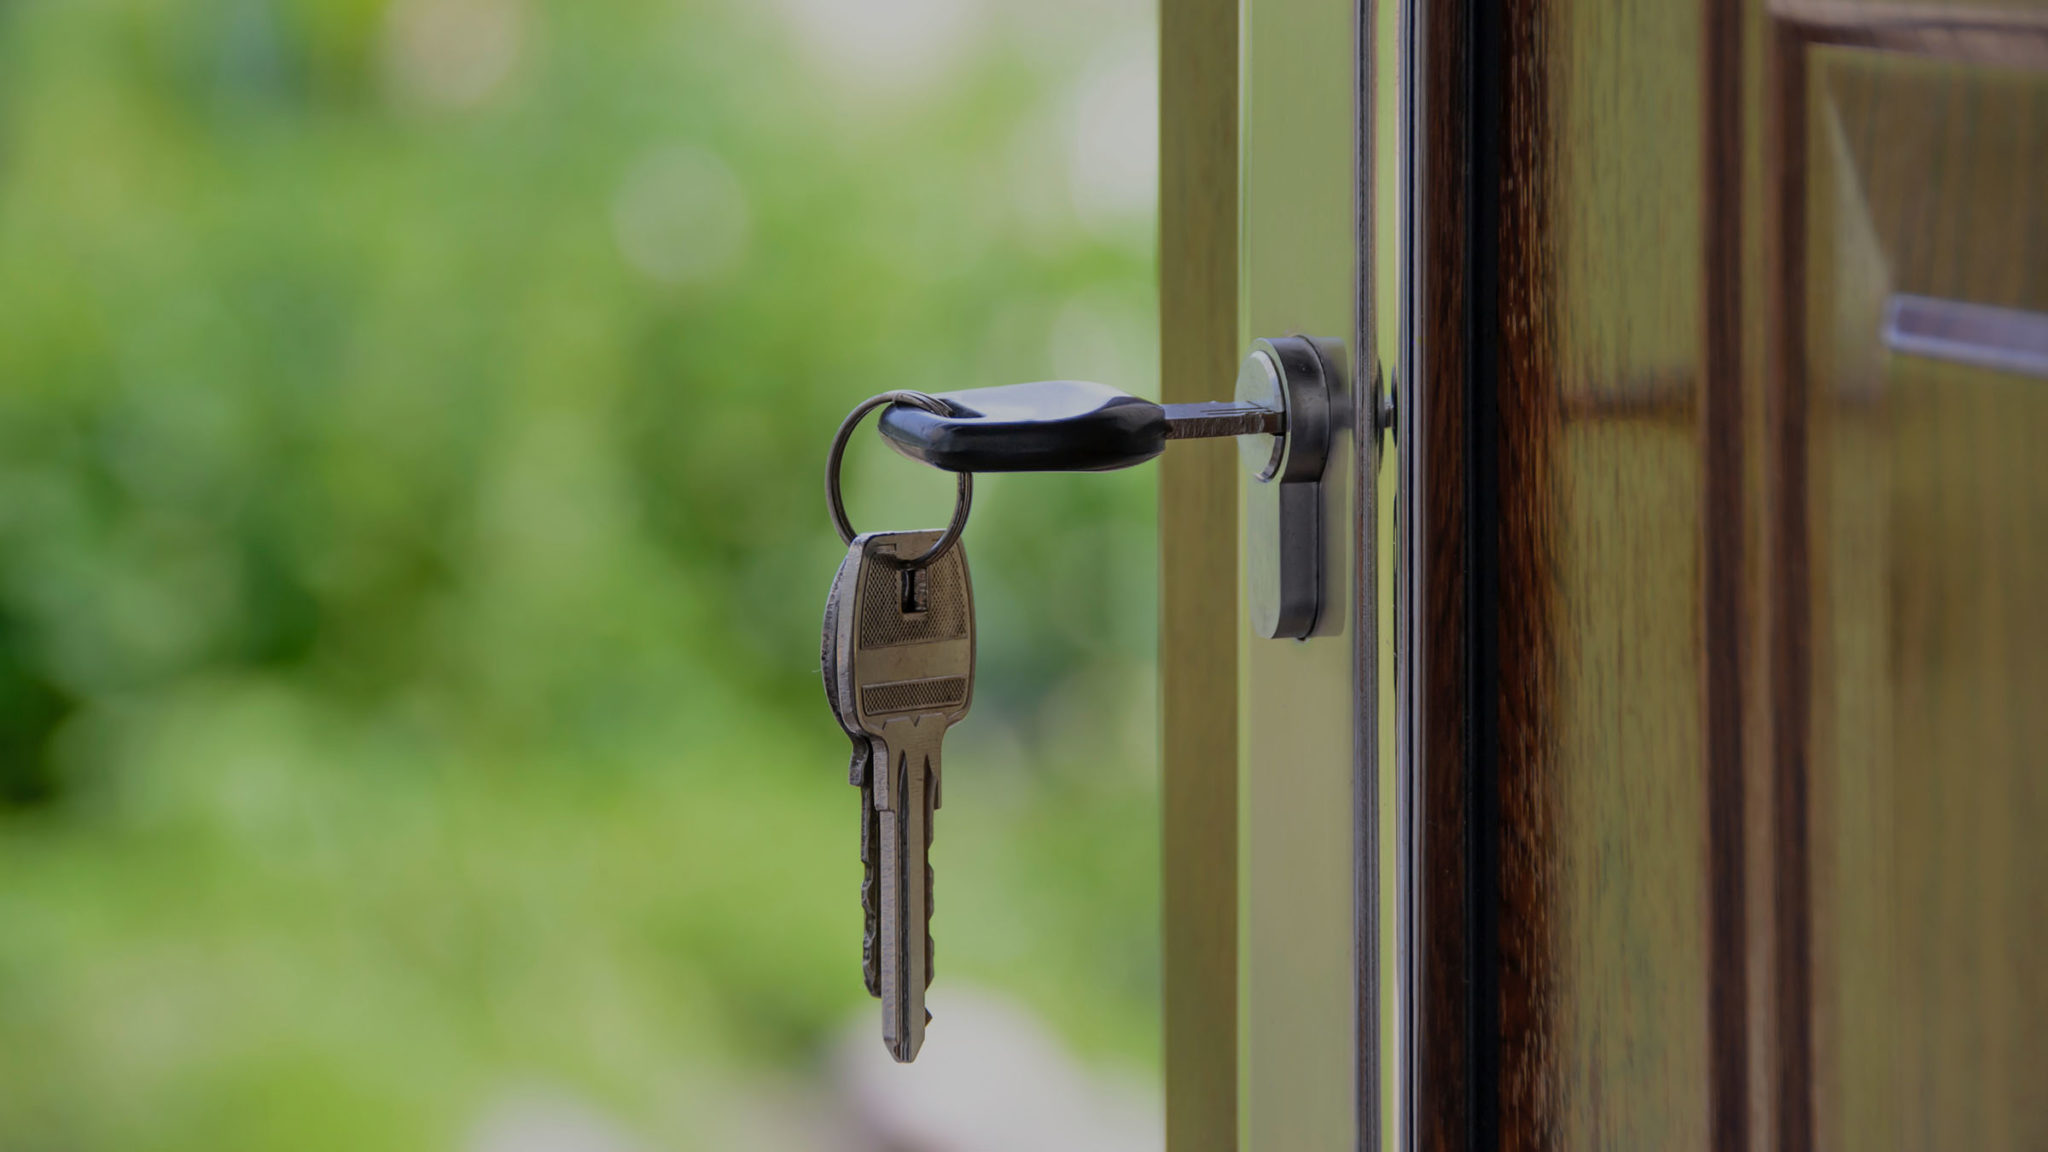 Buyer Protection. The Key To Your New Home.